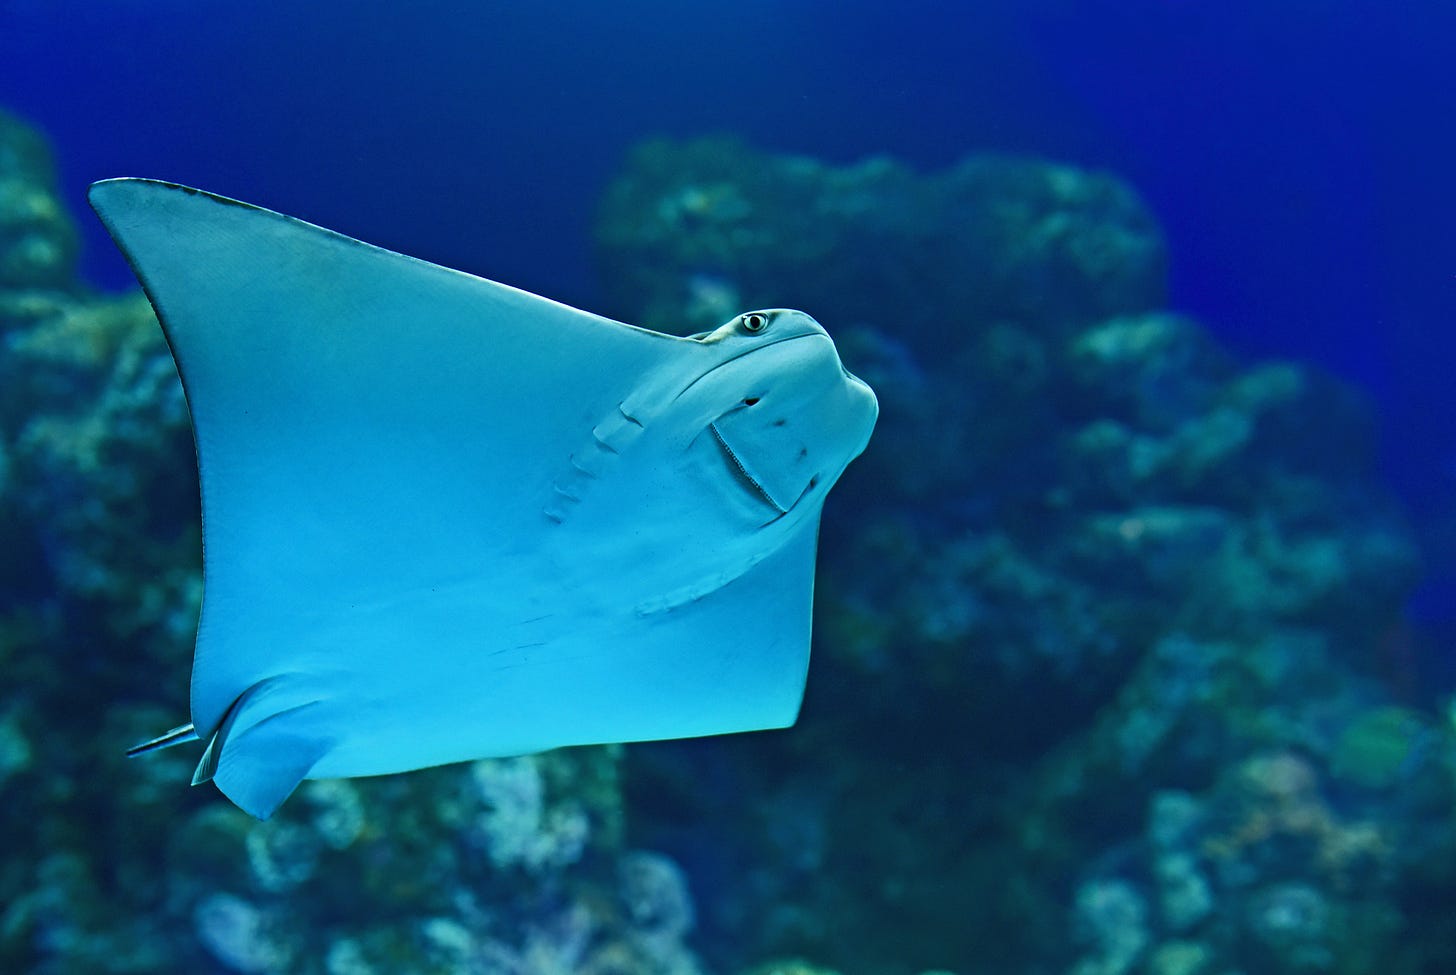 A blue stingray that appears to be smiling